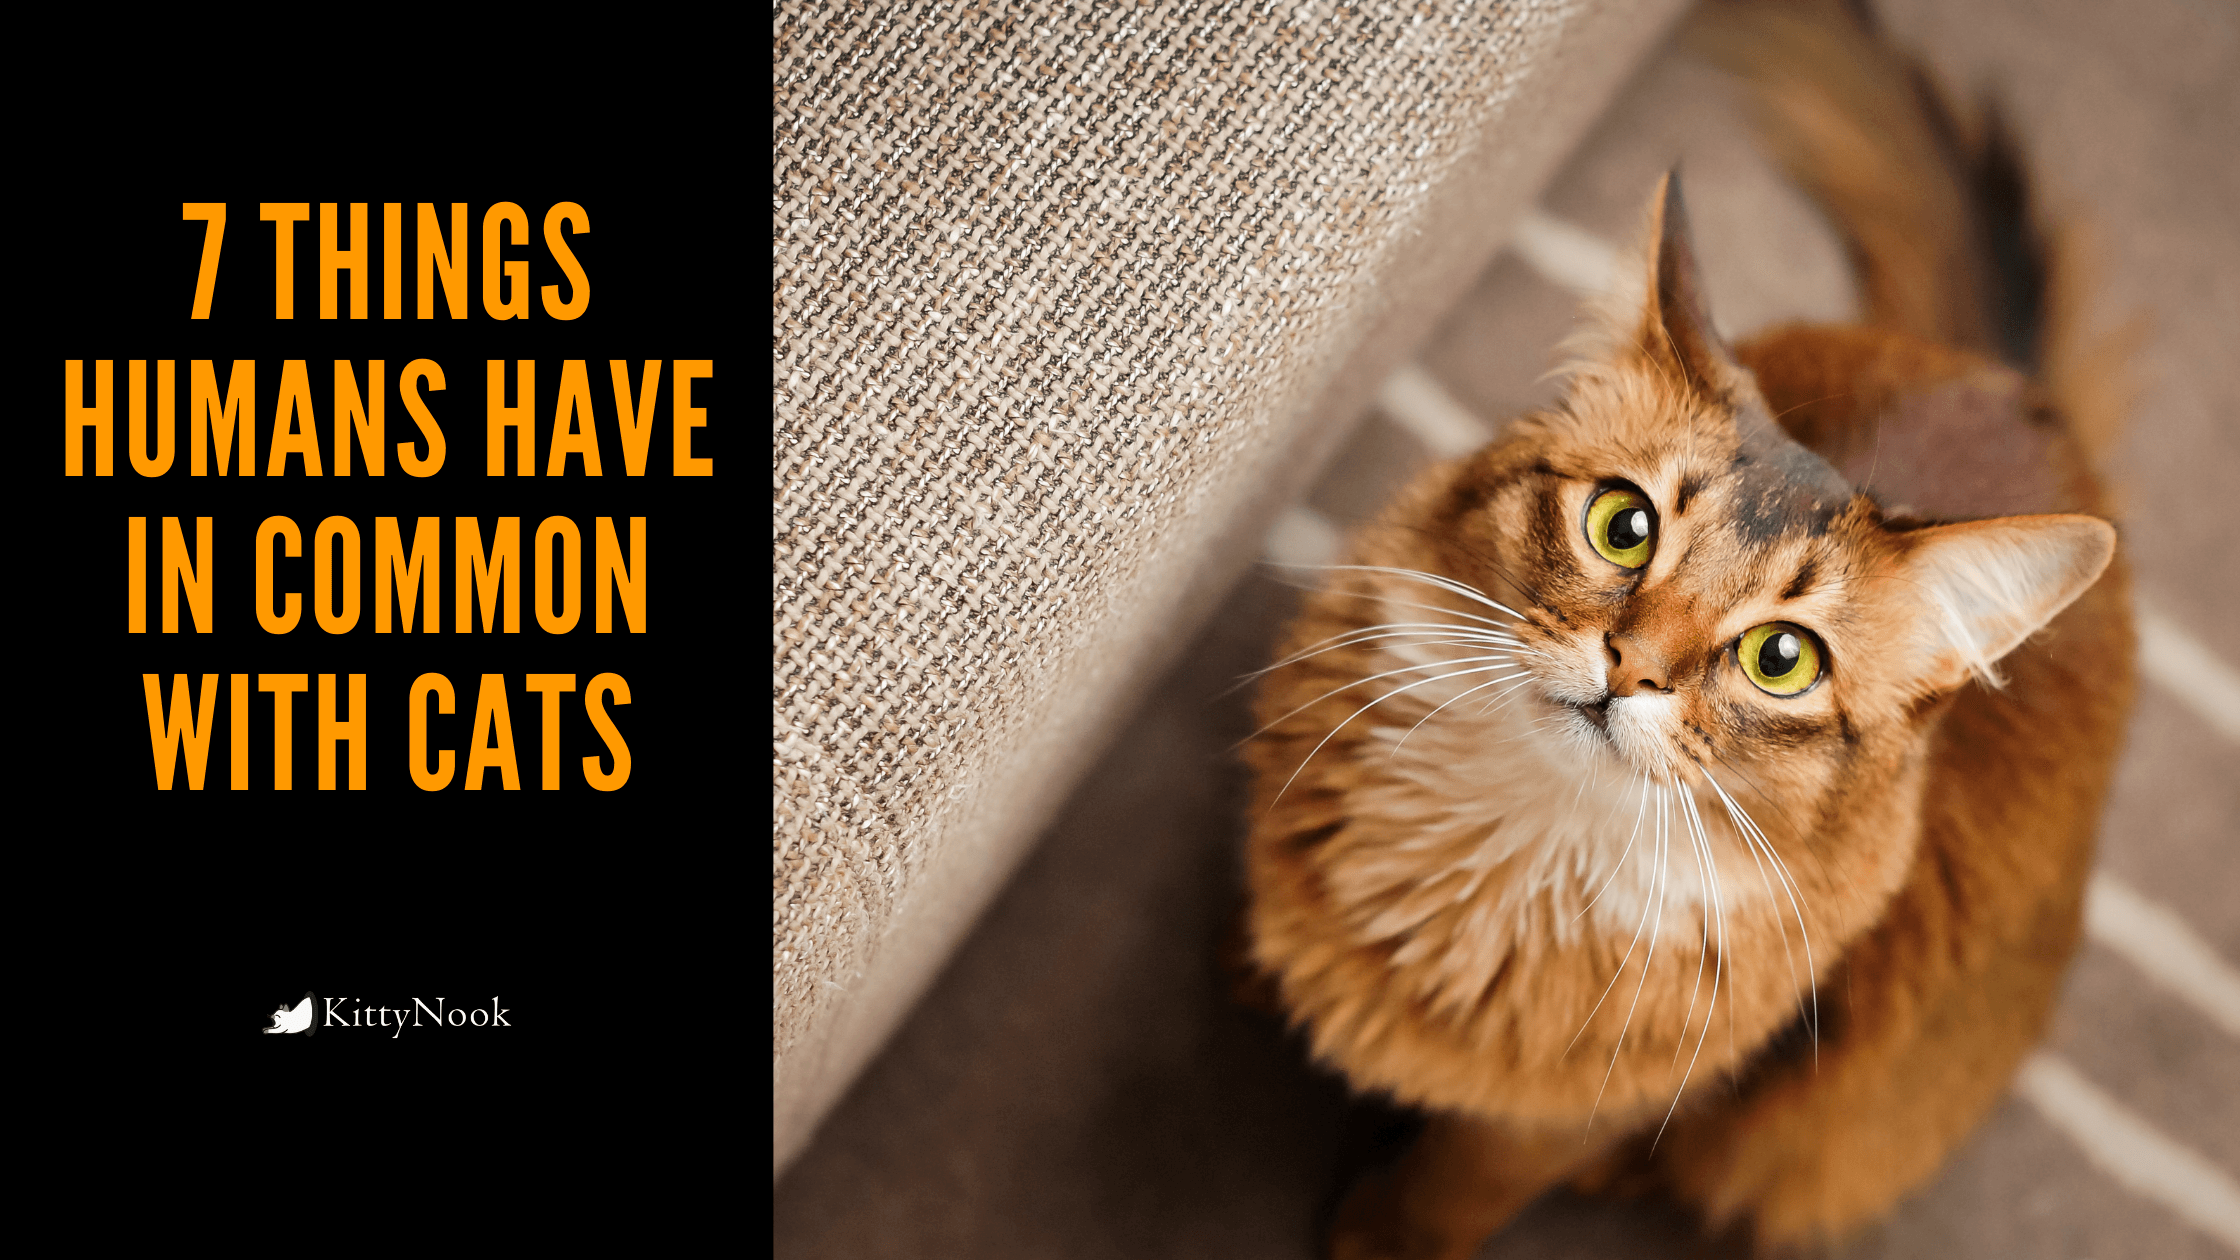 7 Things Humans Have In Common With Cats - KittyNook